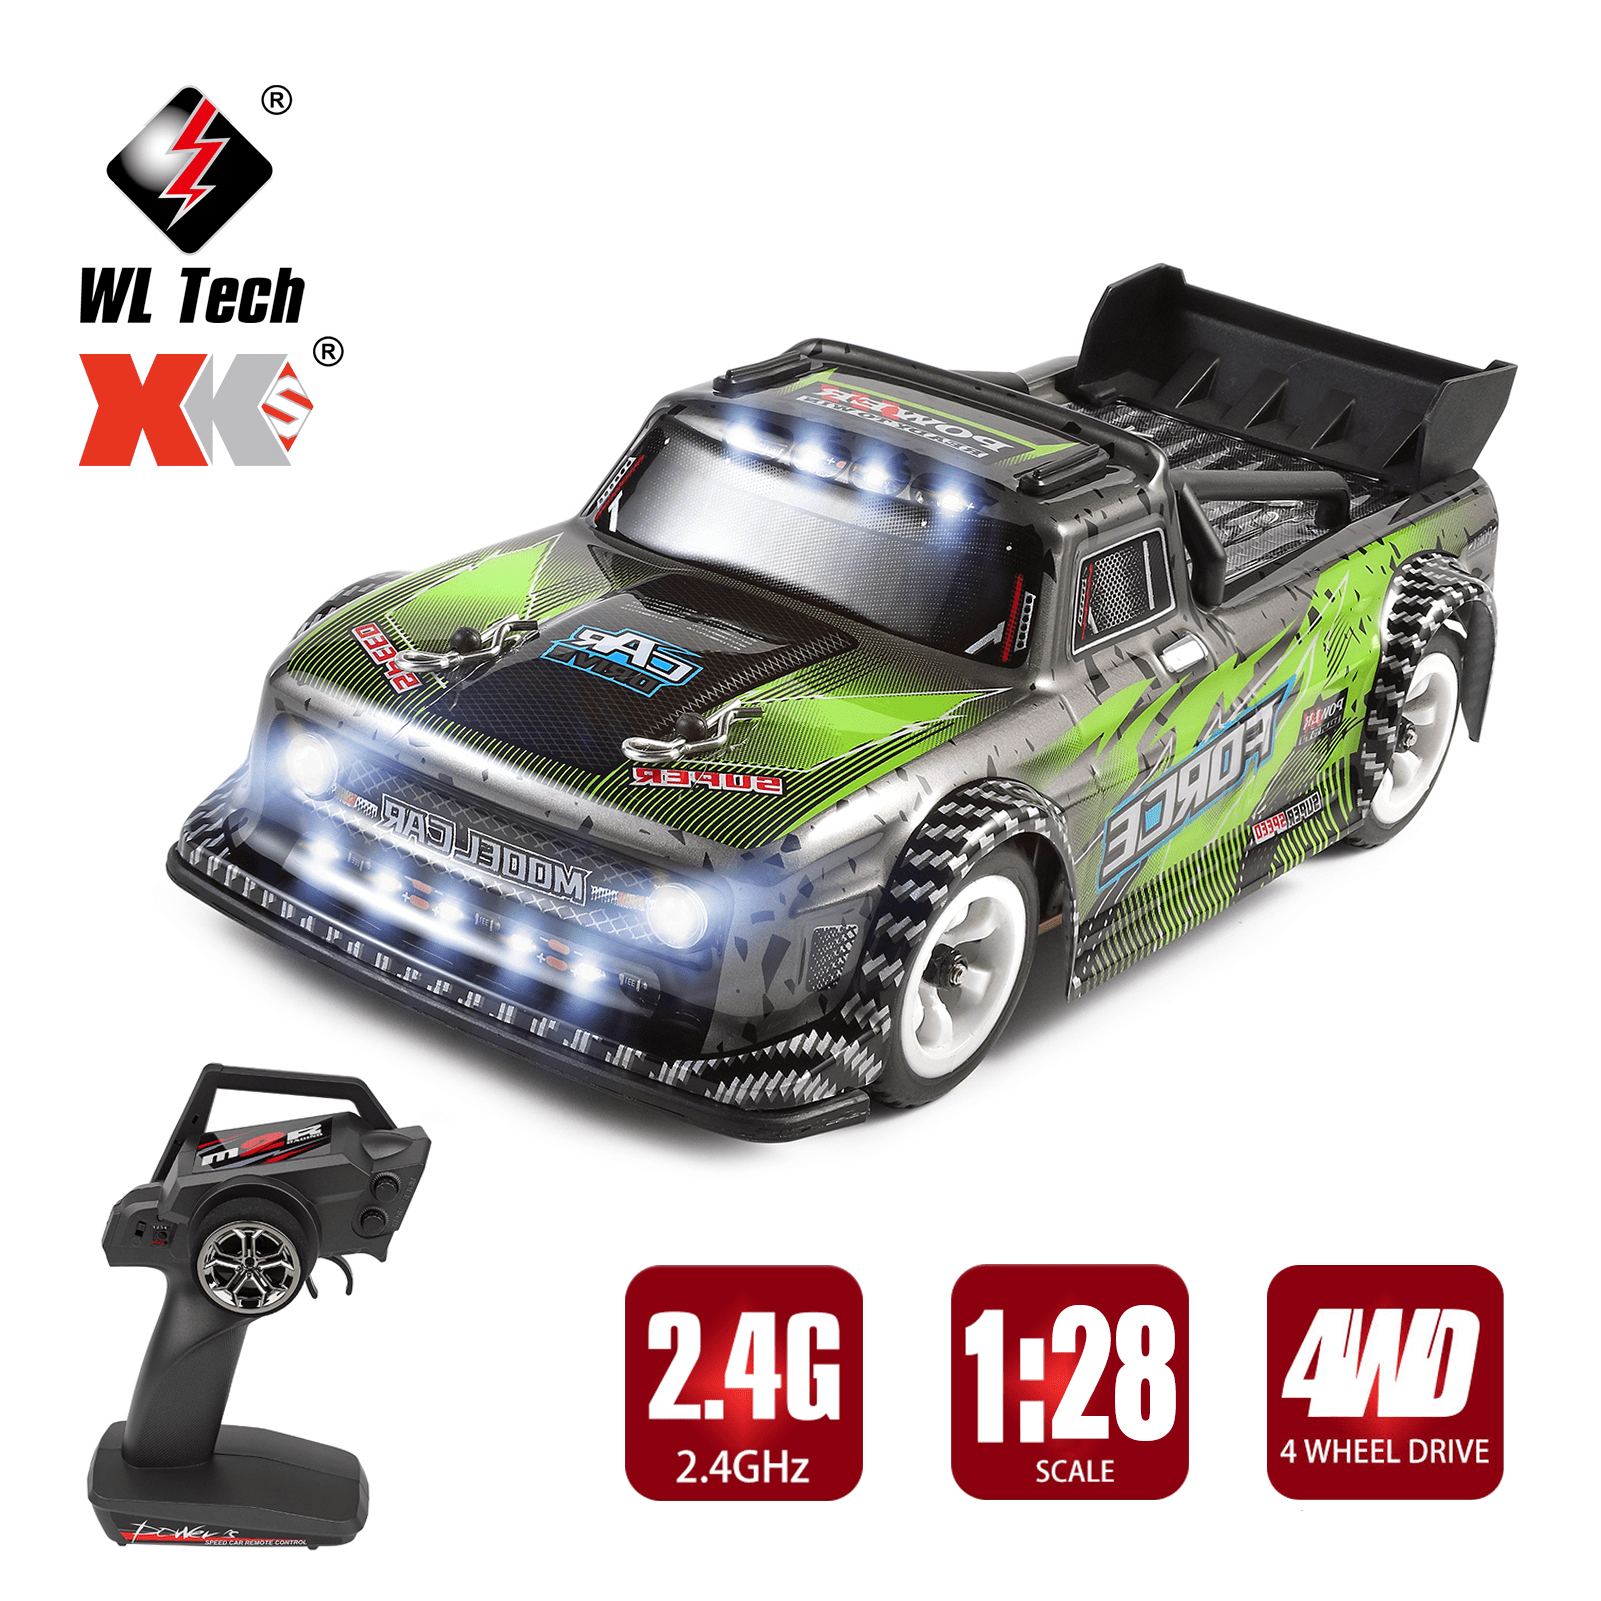 284131 RC 1/28 Short Truck Car 2.4GHz RC Race Car 30km/h Speed Kids Gift RTR with Metal Chassis - Walmart.com